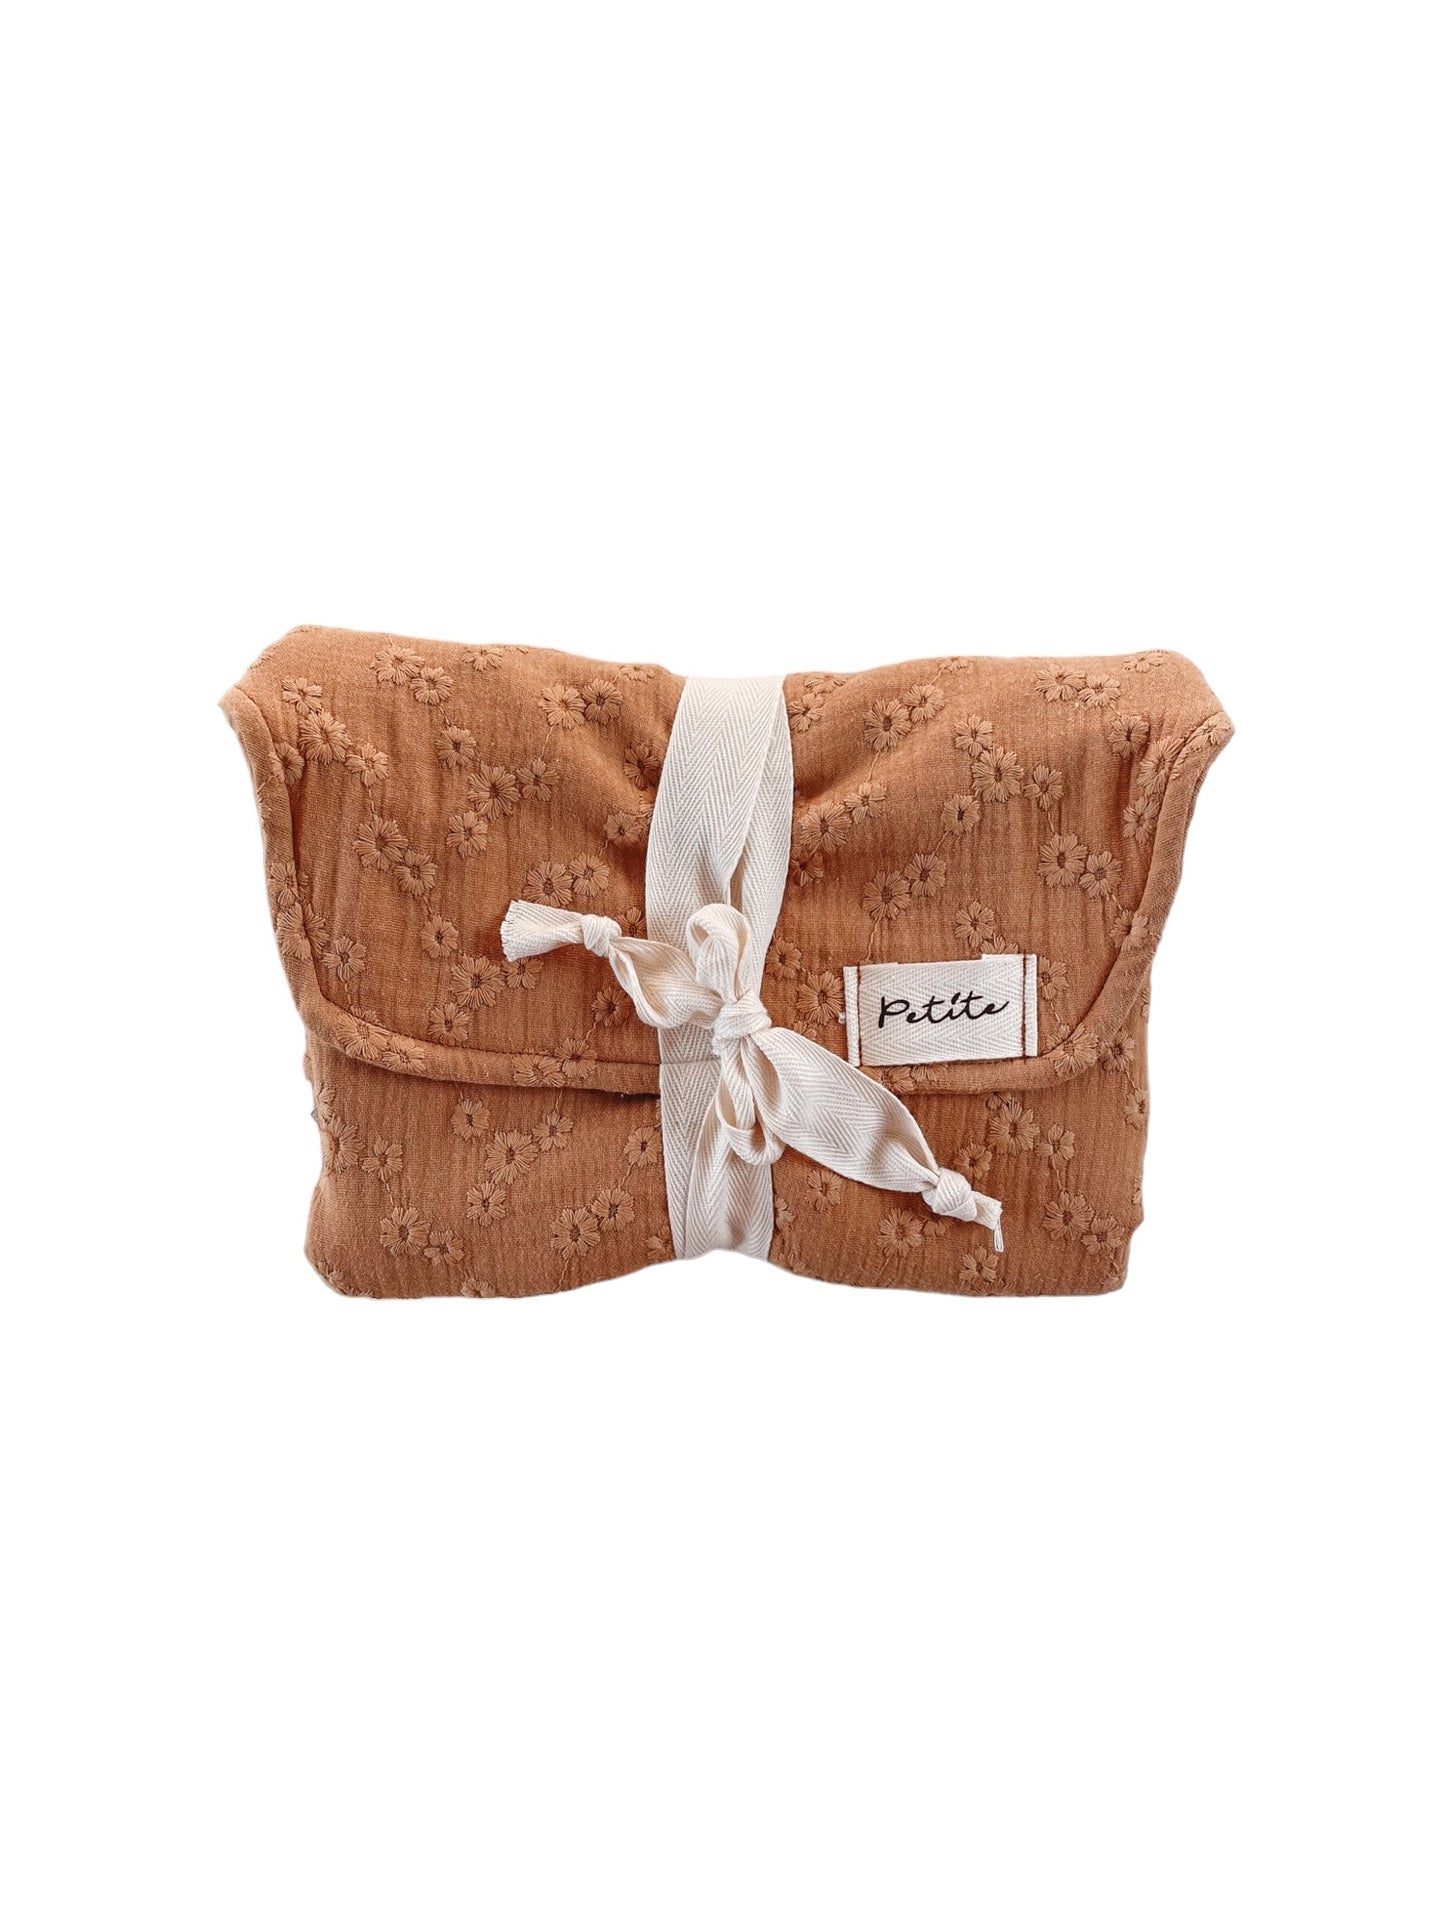 Diaper changing pad / embroidered caramel